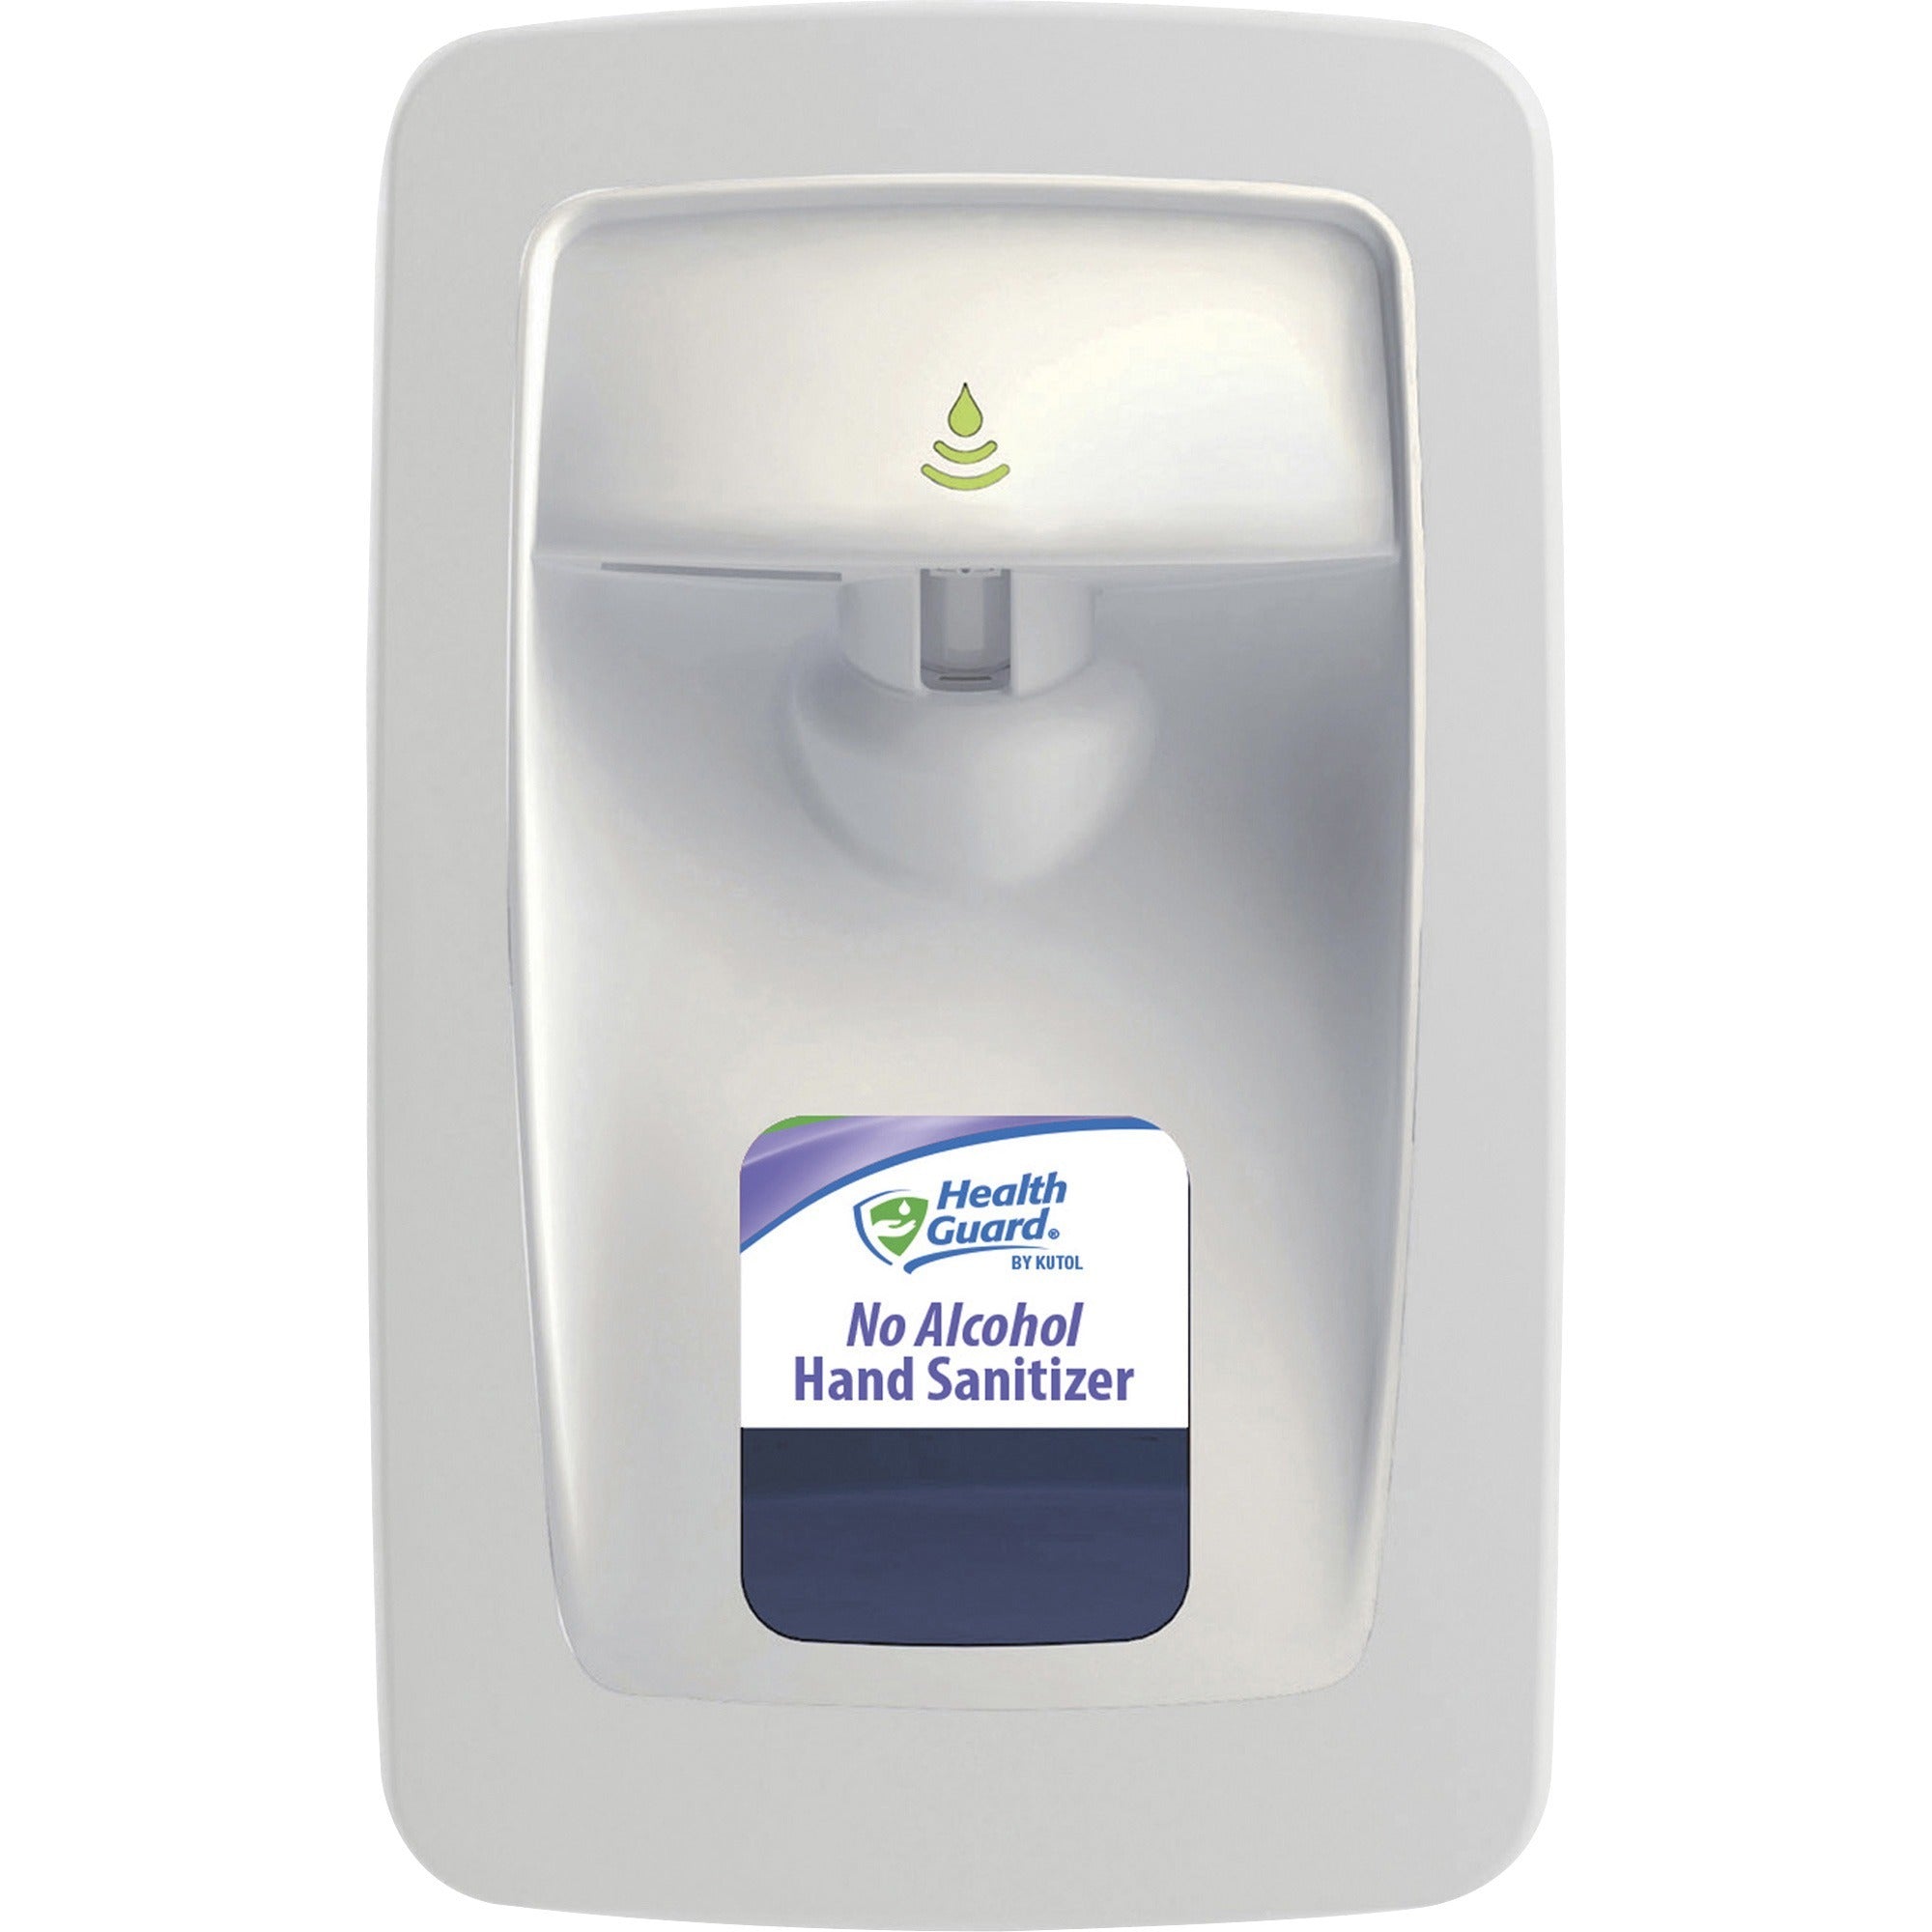 health-guard-designer-series-no-touch-dispenser-automatic-106-quart-capacity-support-4-x-c-battery-touch-free-key-lock-refillable-white-1each_kutns011wh33 - 1